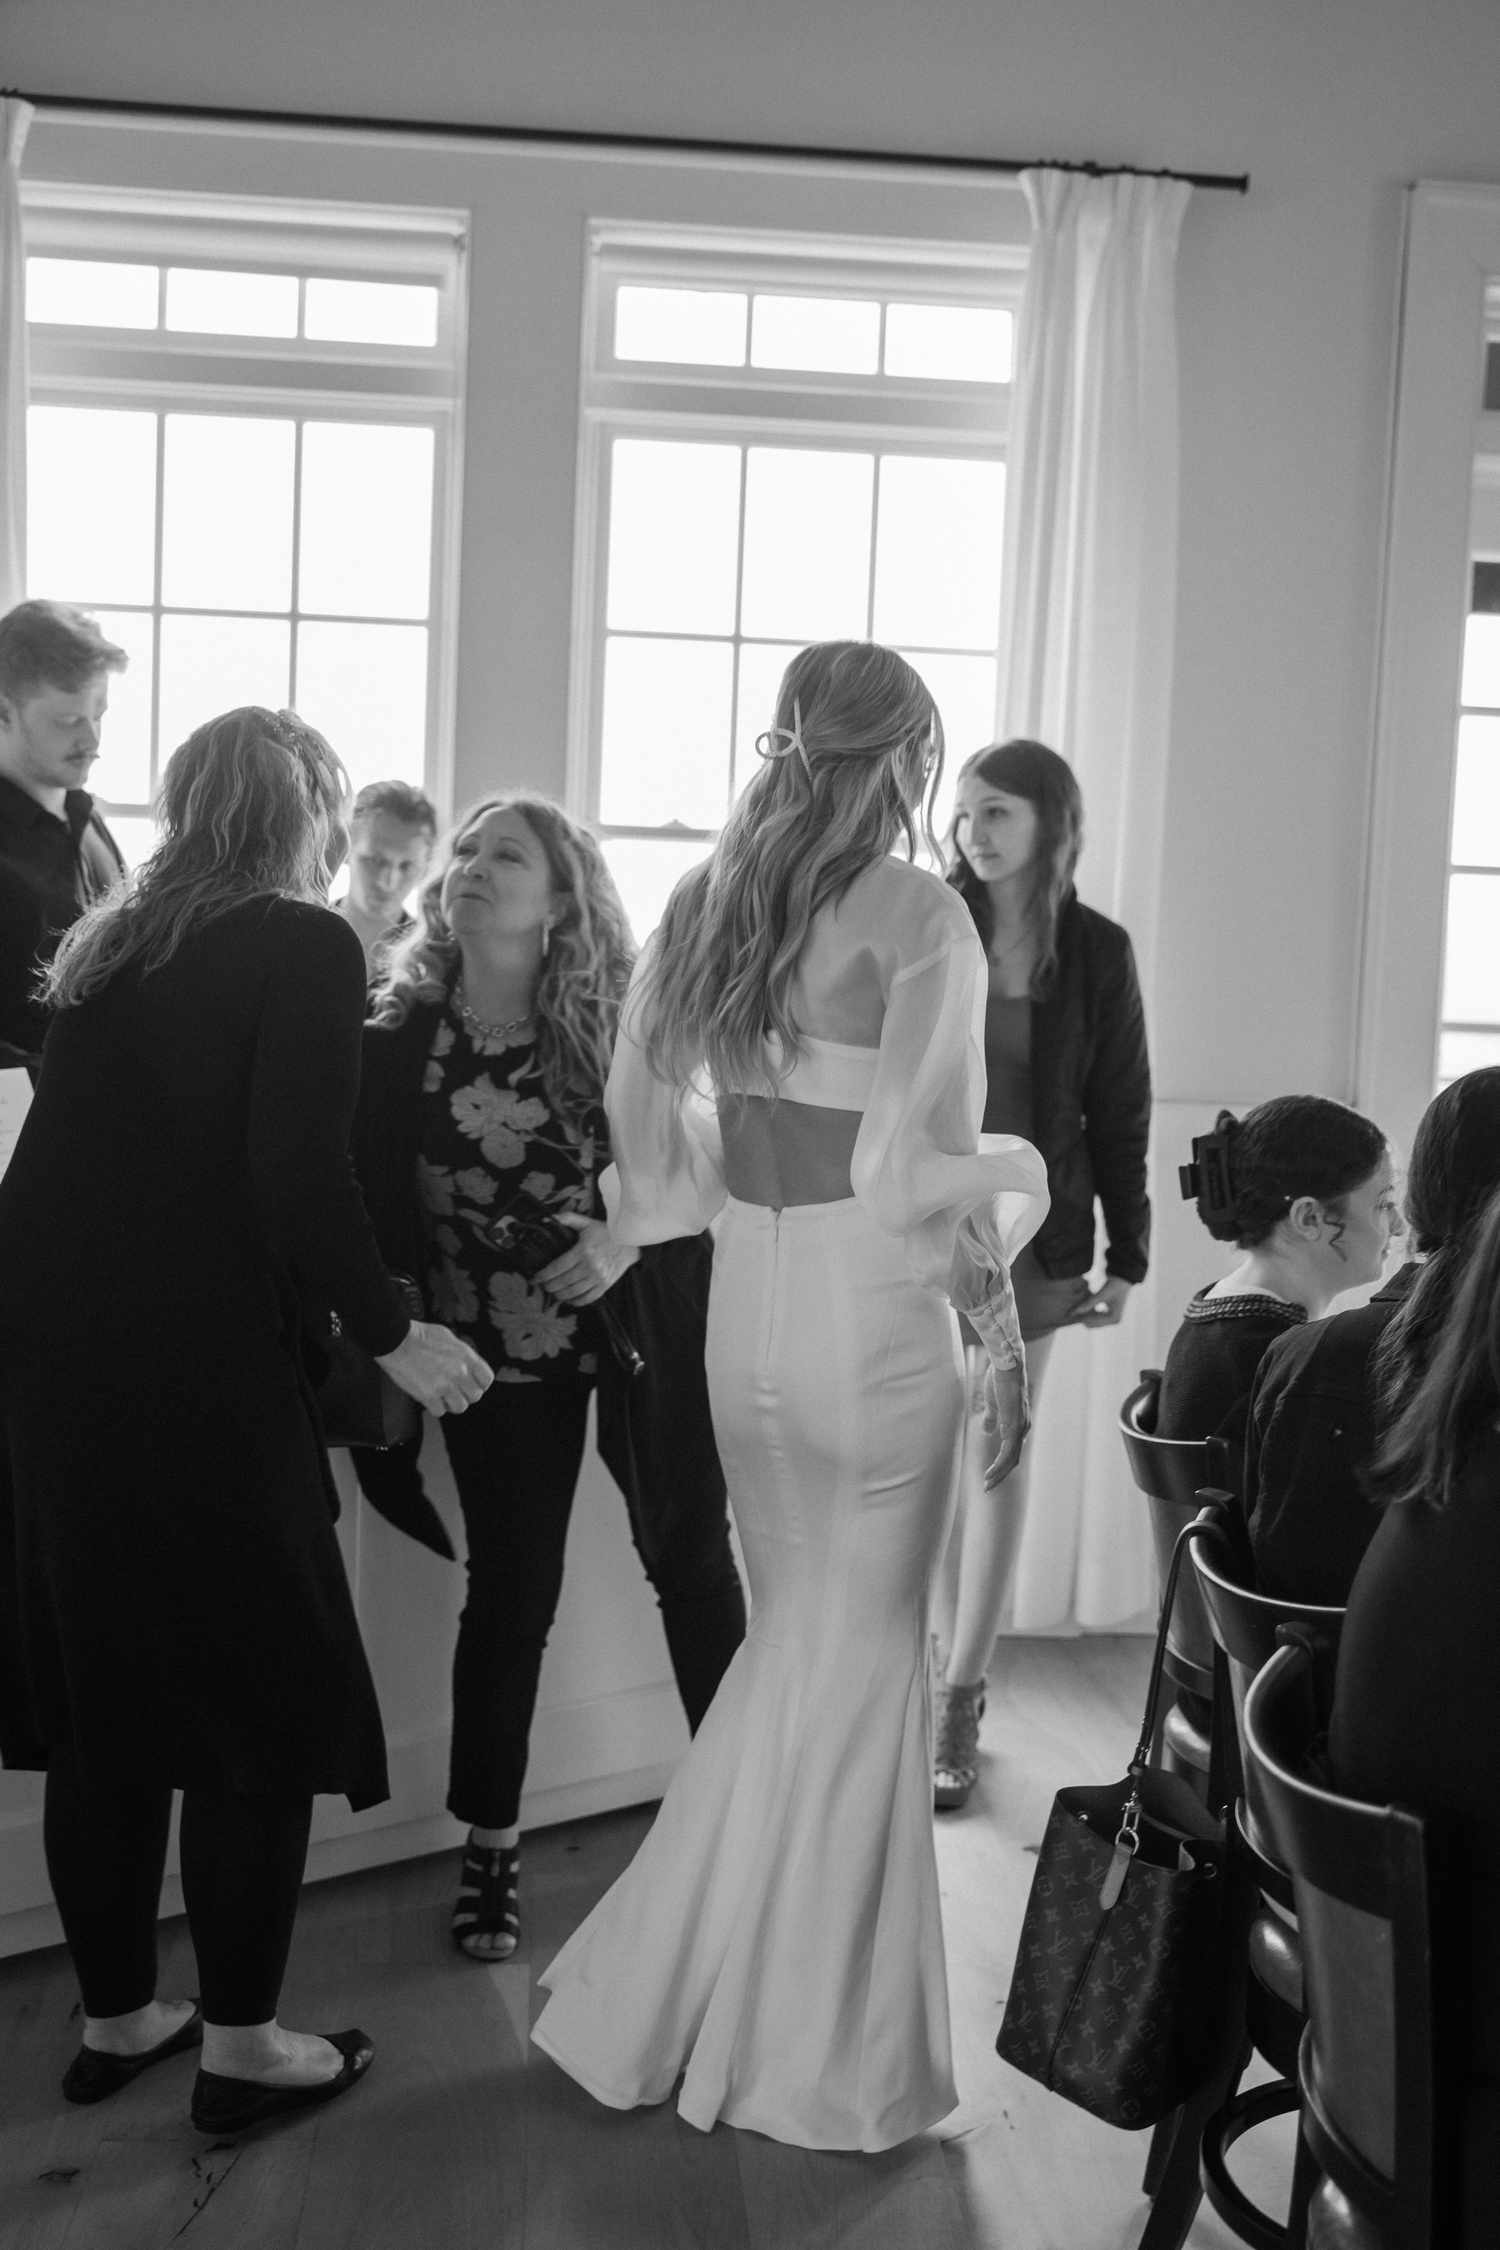 Black and White Portrait of Bride Greeting Guests at Bridal Shower